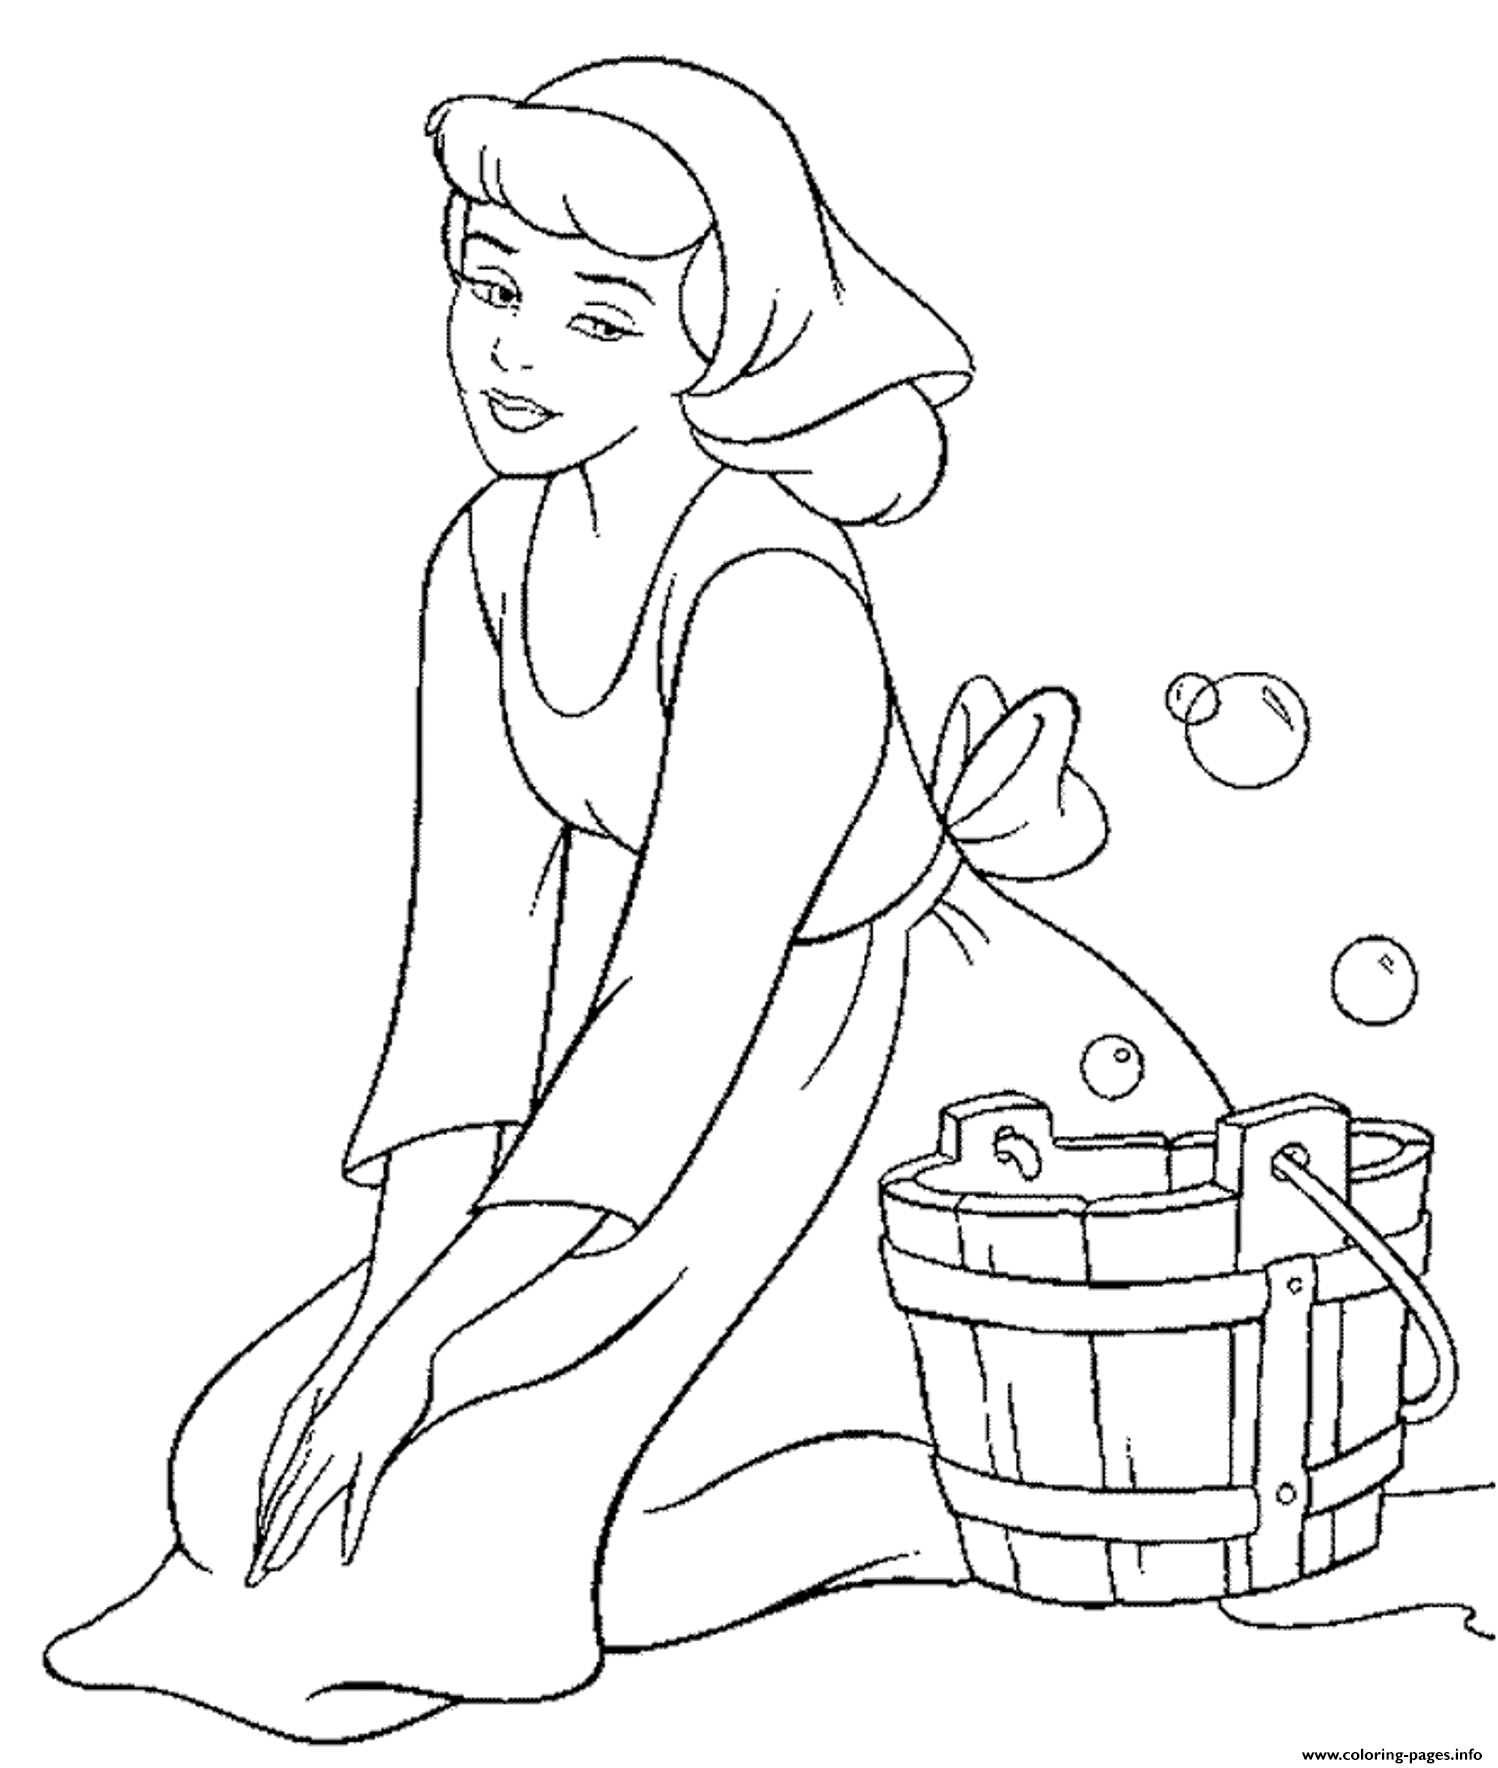 Princess Free Disney Cinderella For Kids6244 coloring pages